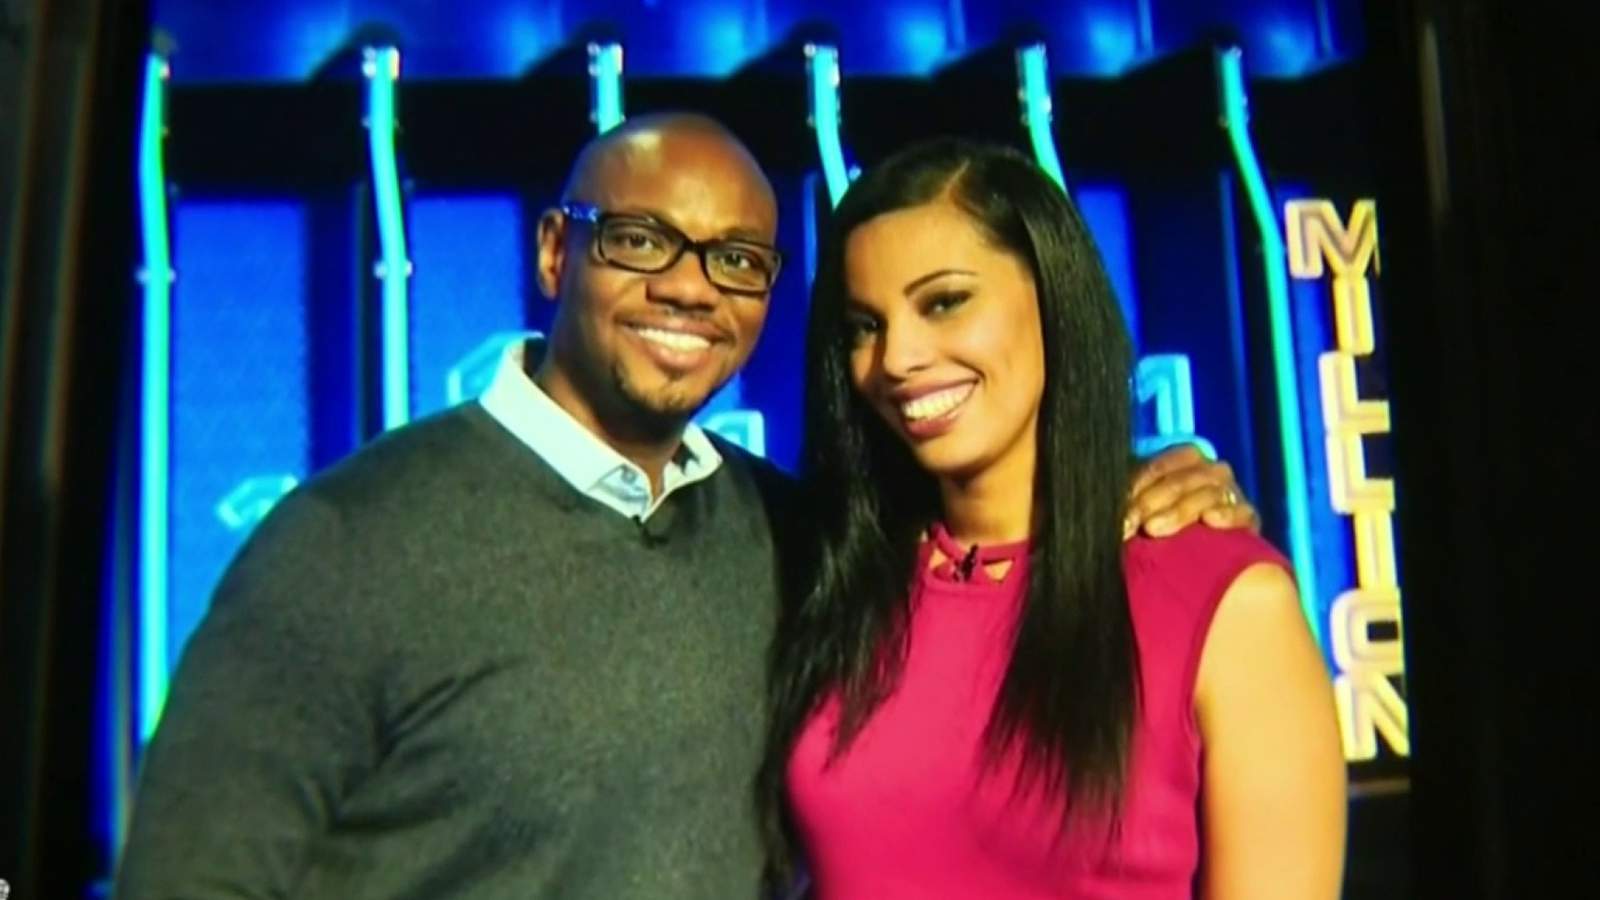 Detroit couple could win $13.6 million on ‘The Wall’ gameshow